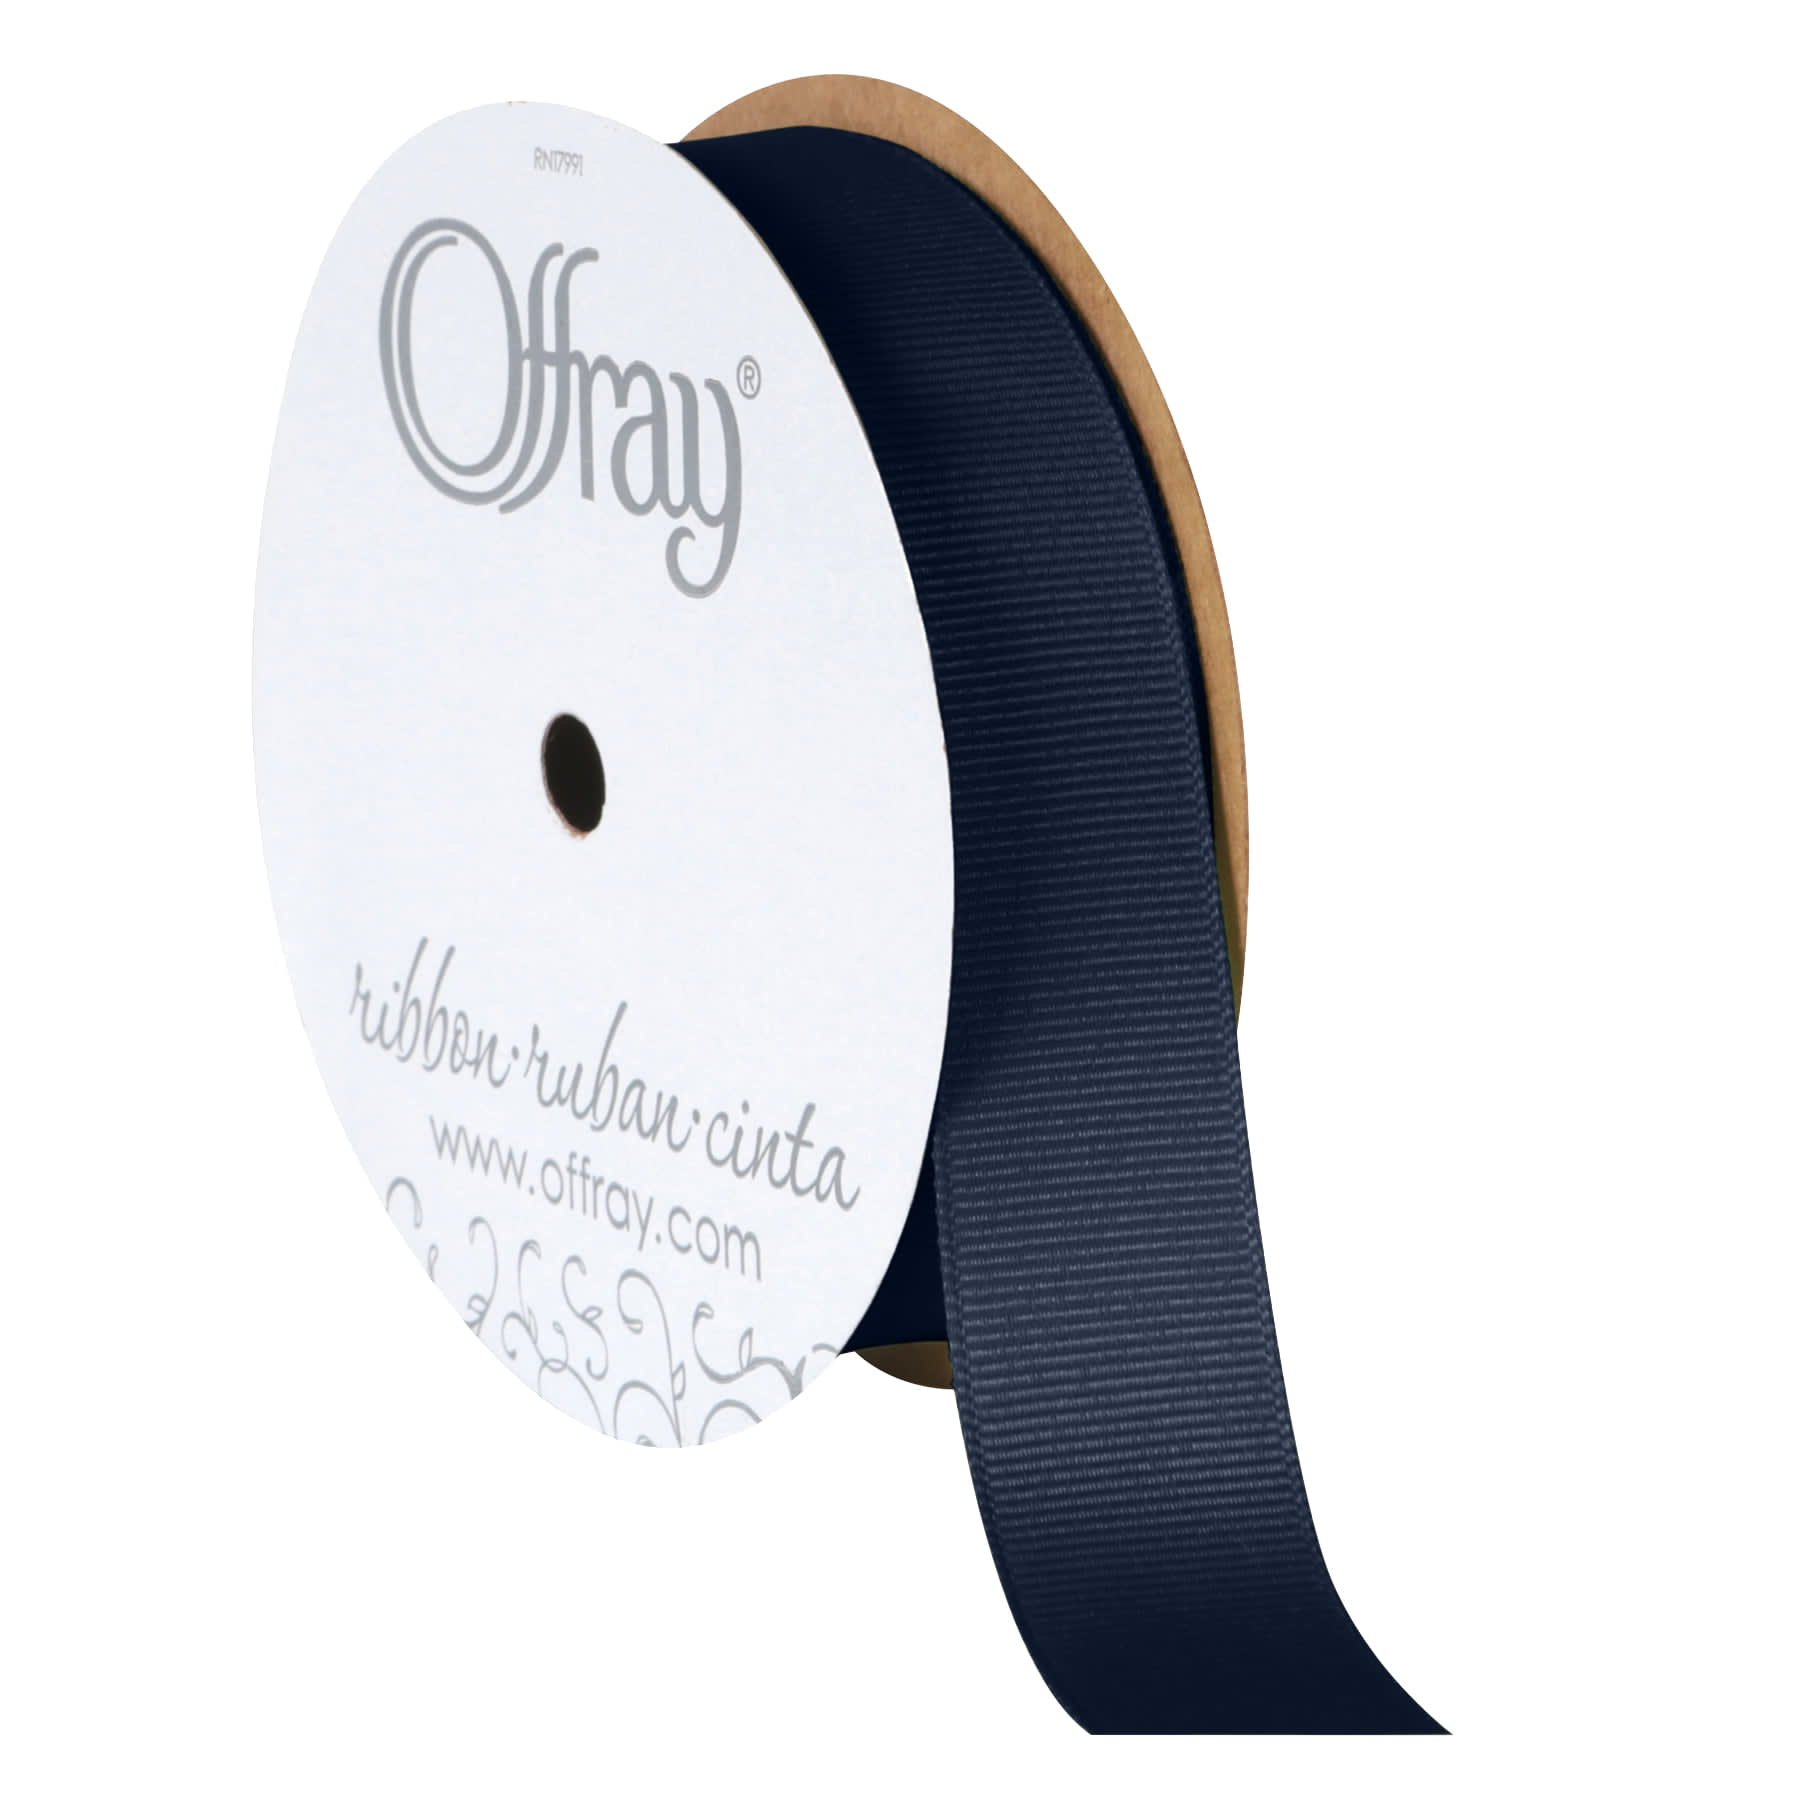 Offray Ribbon, Silver 3/8 inch Metallic Ribbon, 15 feet - DroneUp Delivery